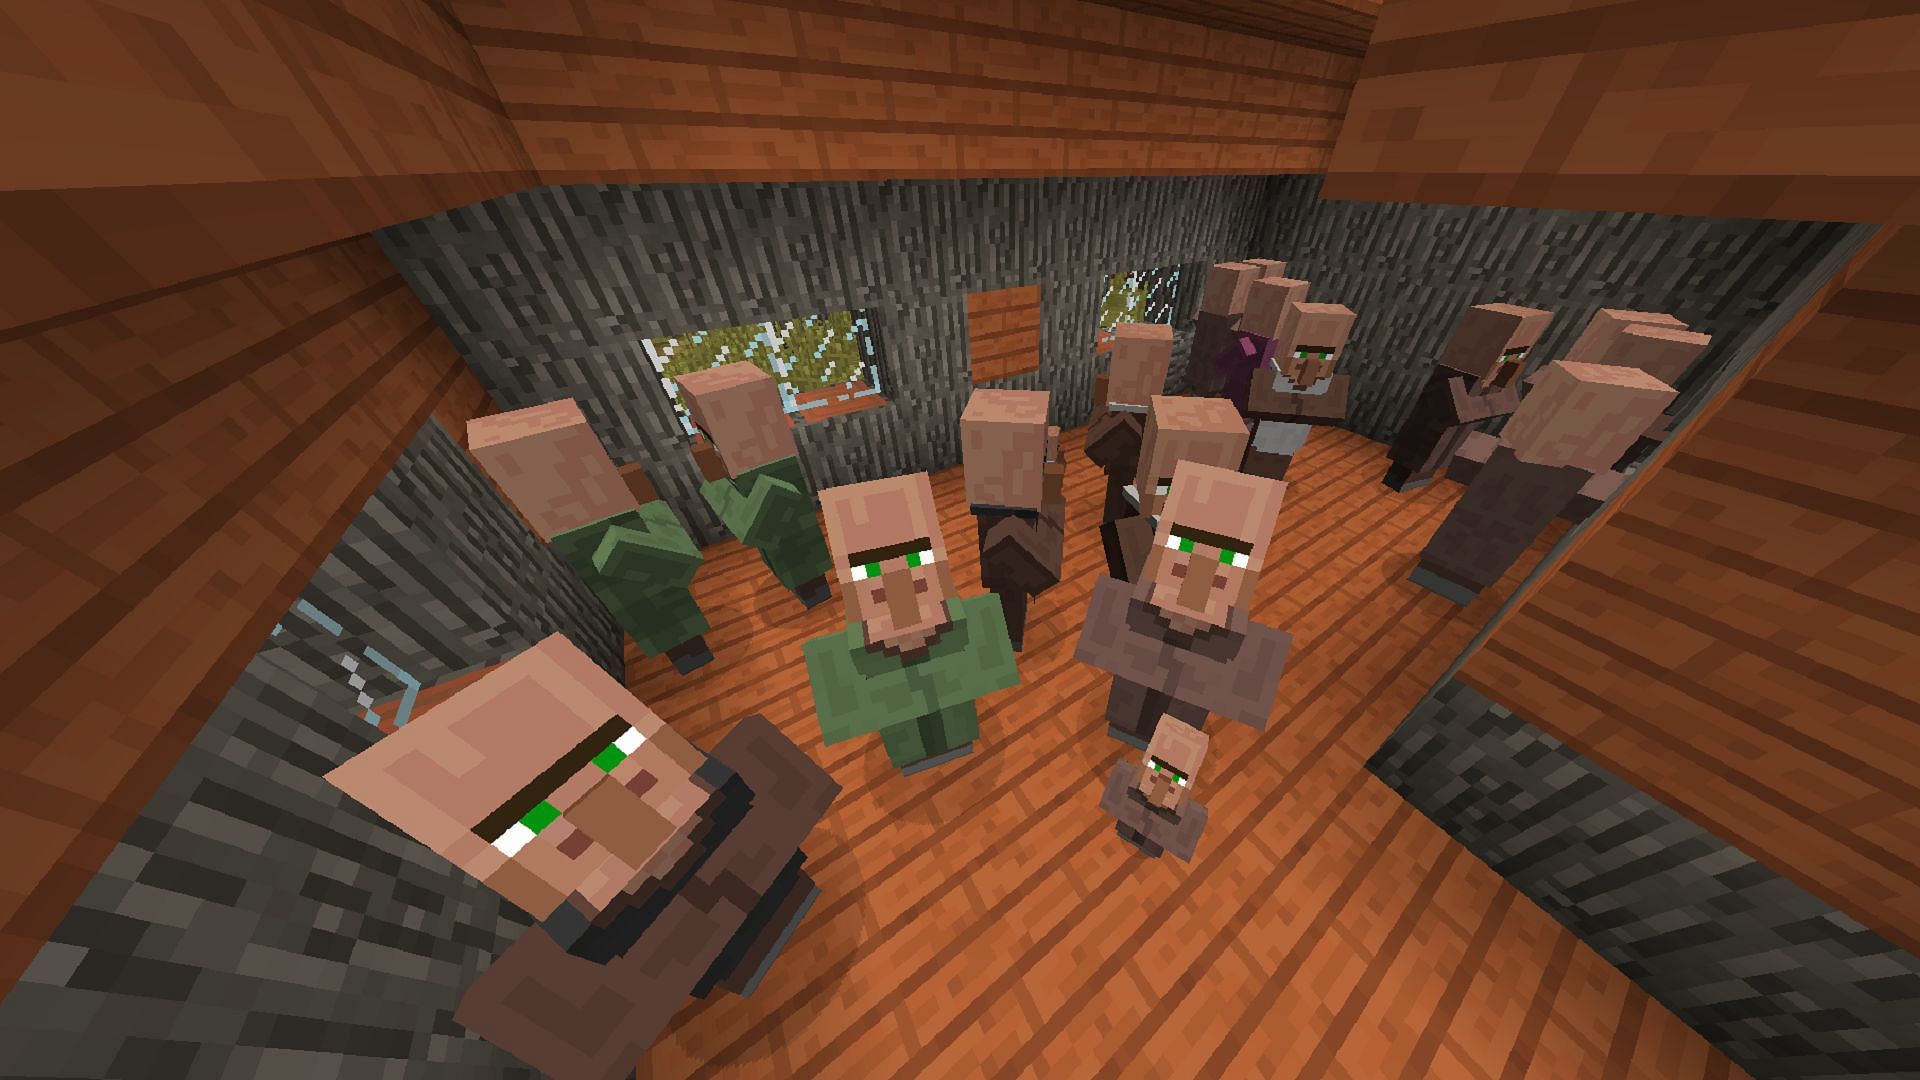 An unused villager variant now exists in Minecraft after the Village &amp; Pillage update (Image via Mojang)